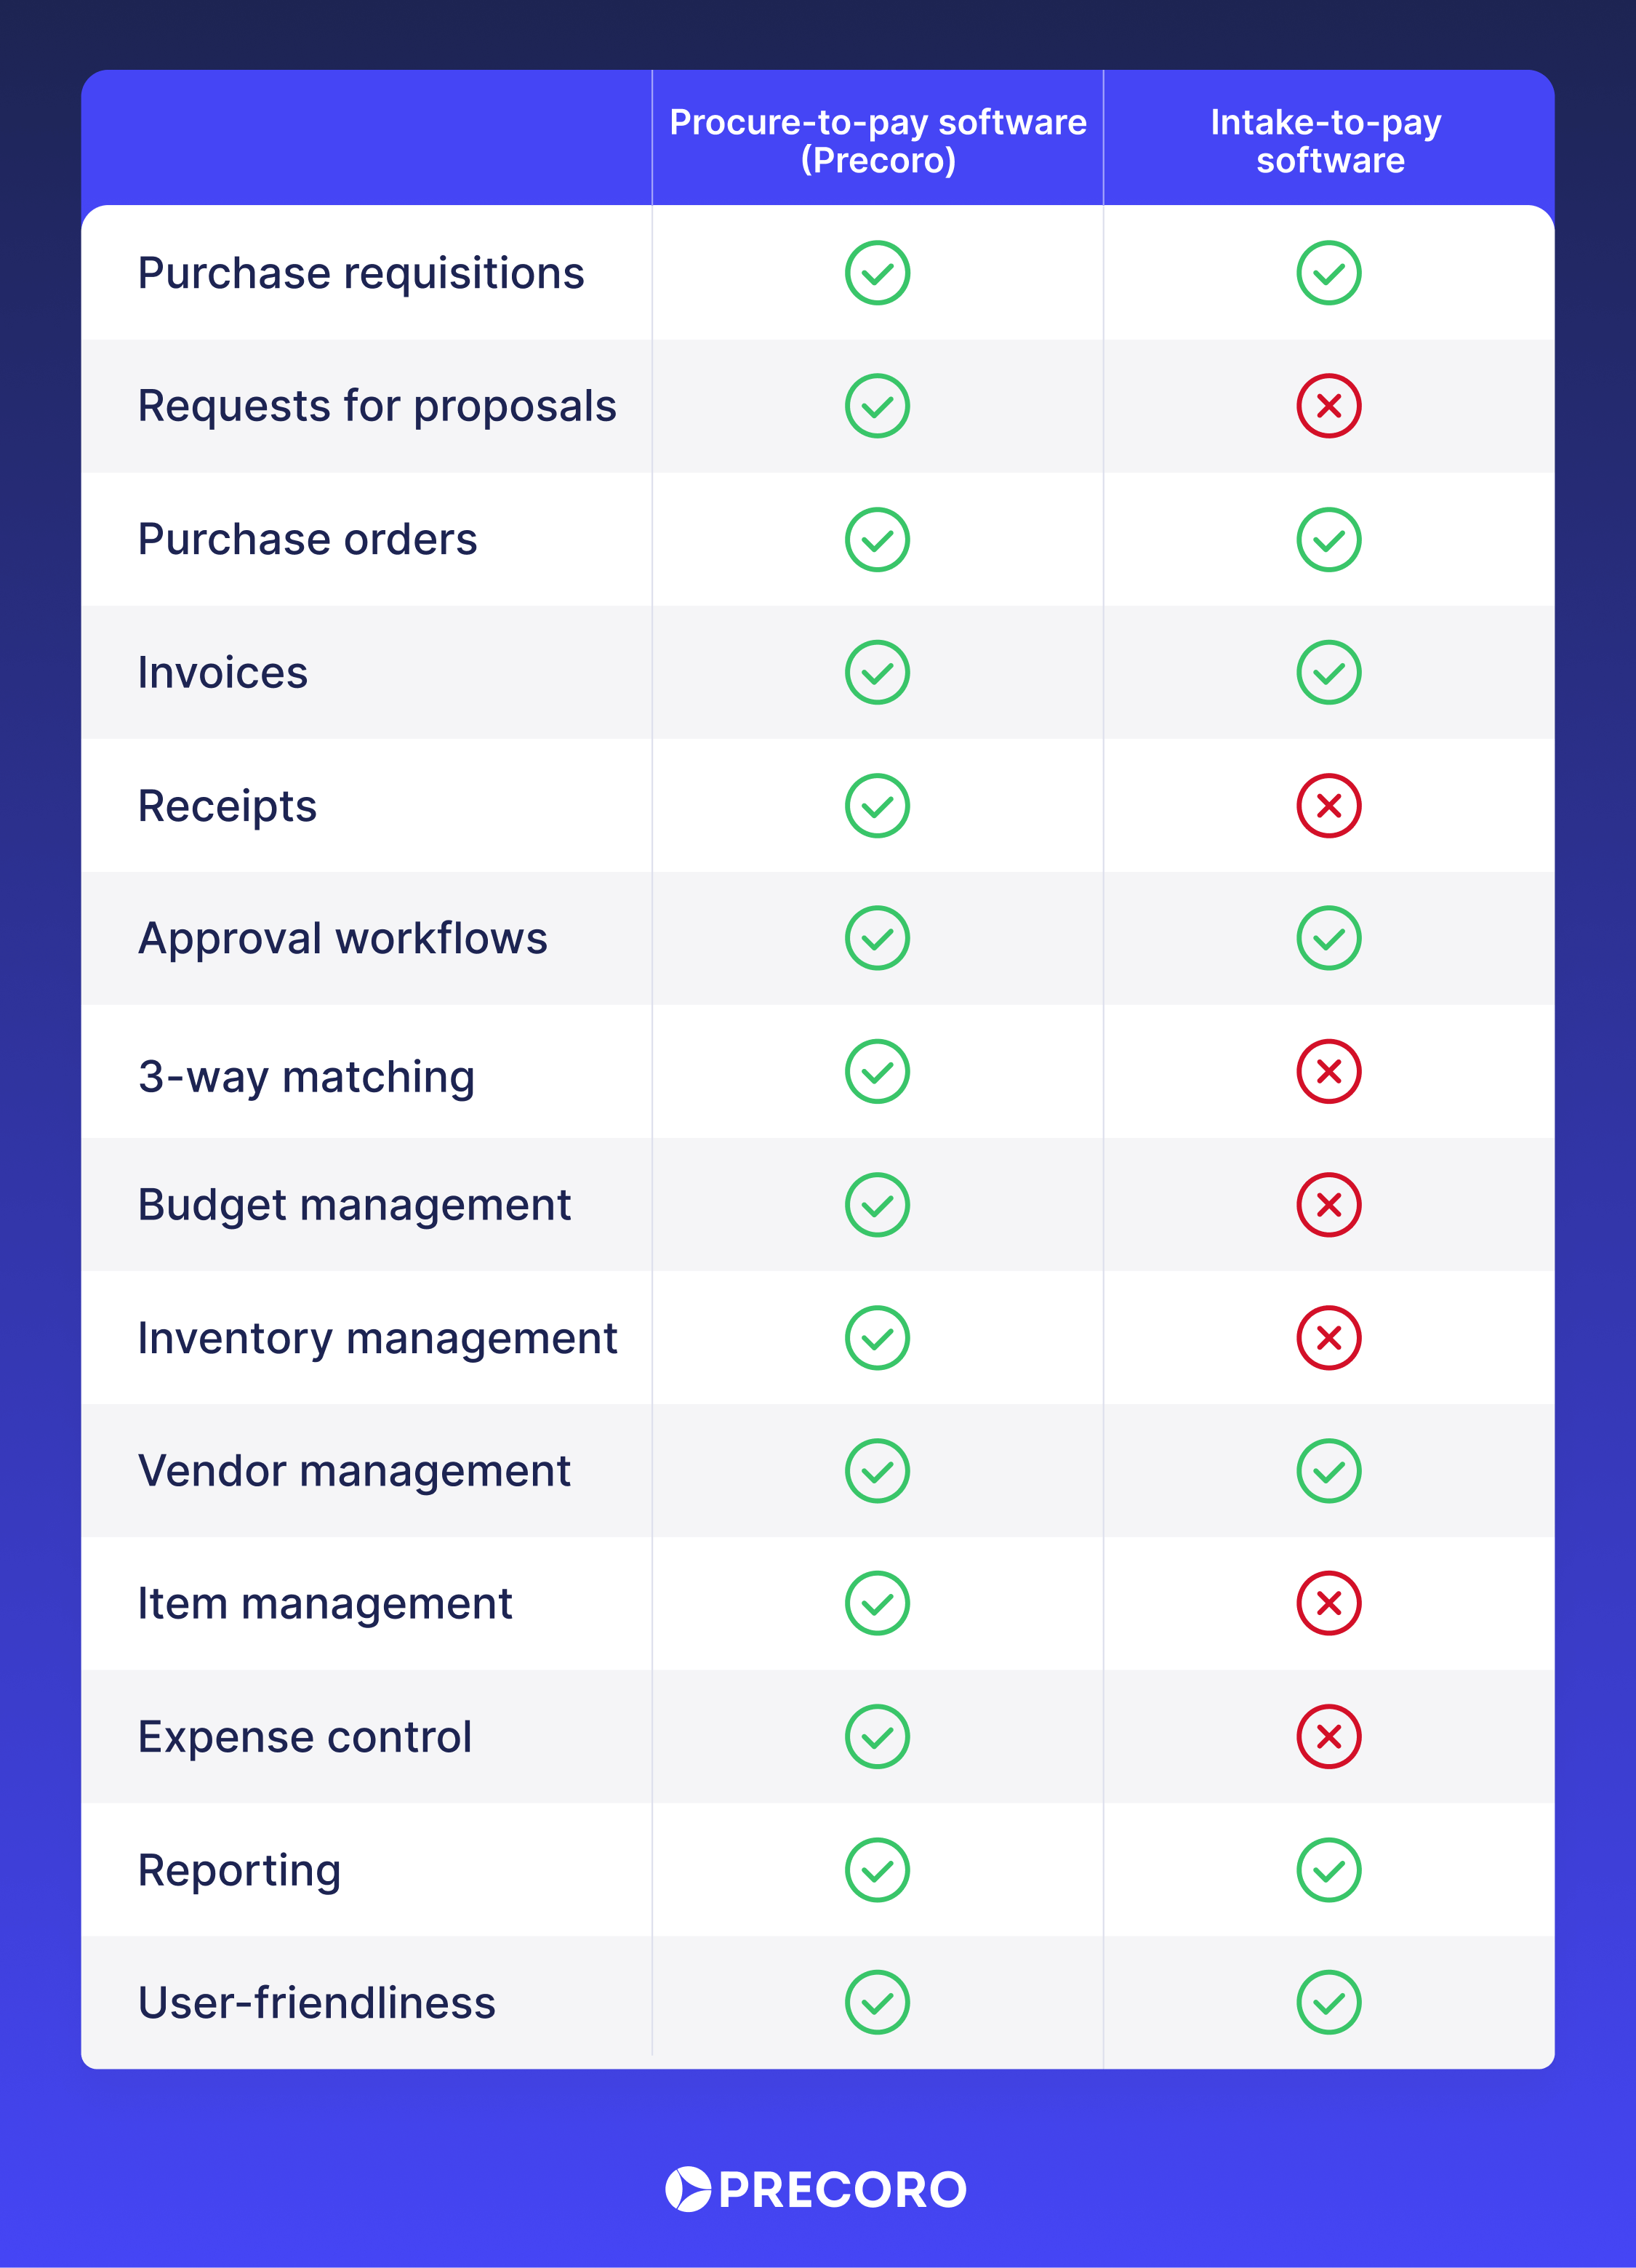 comparison table of procure-to-pay and intake-to-pay software